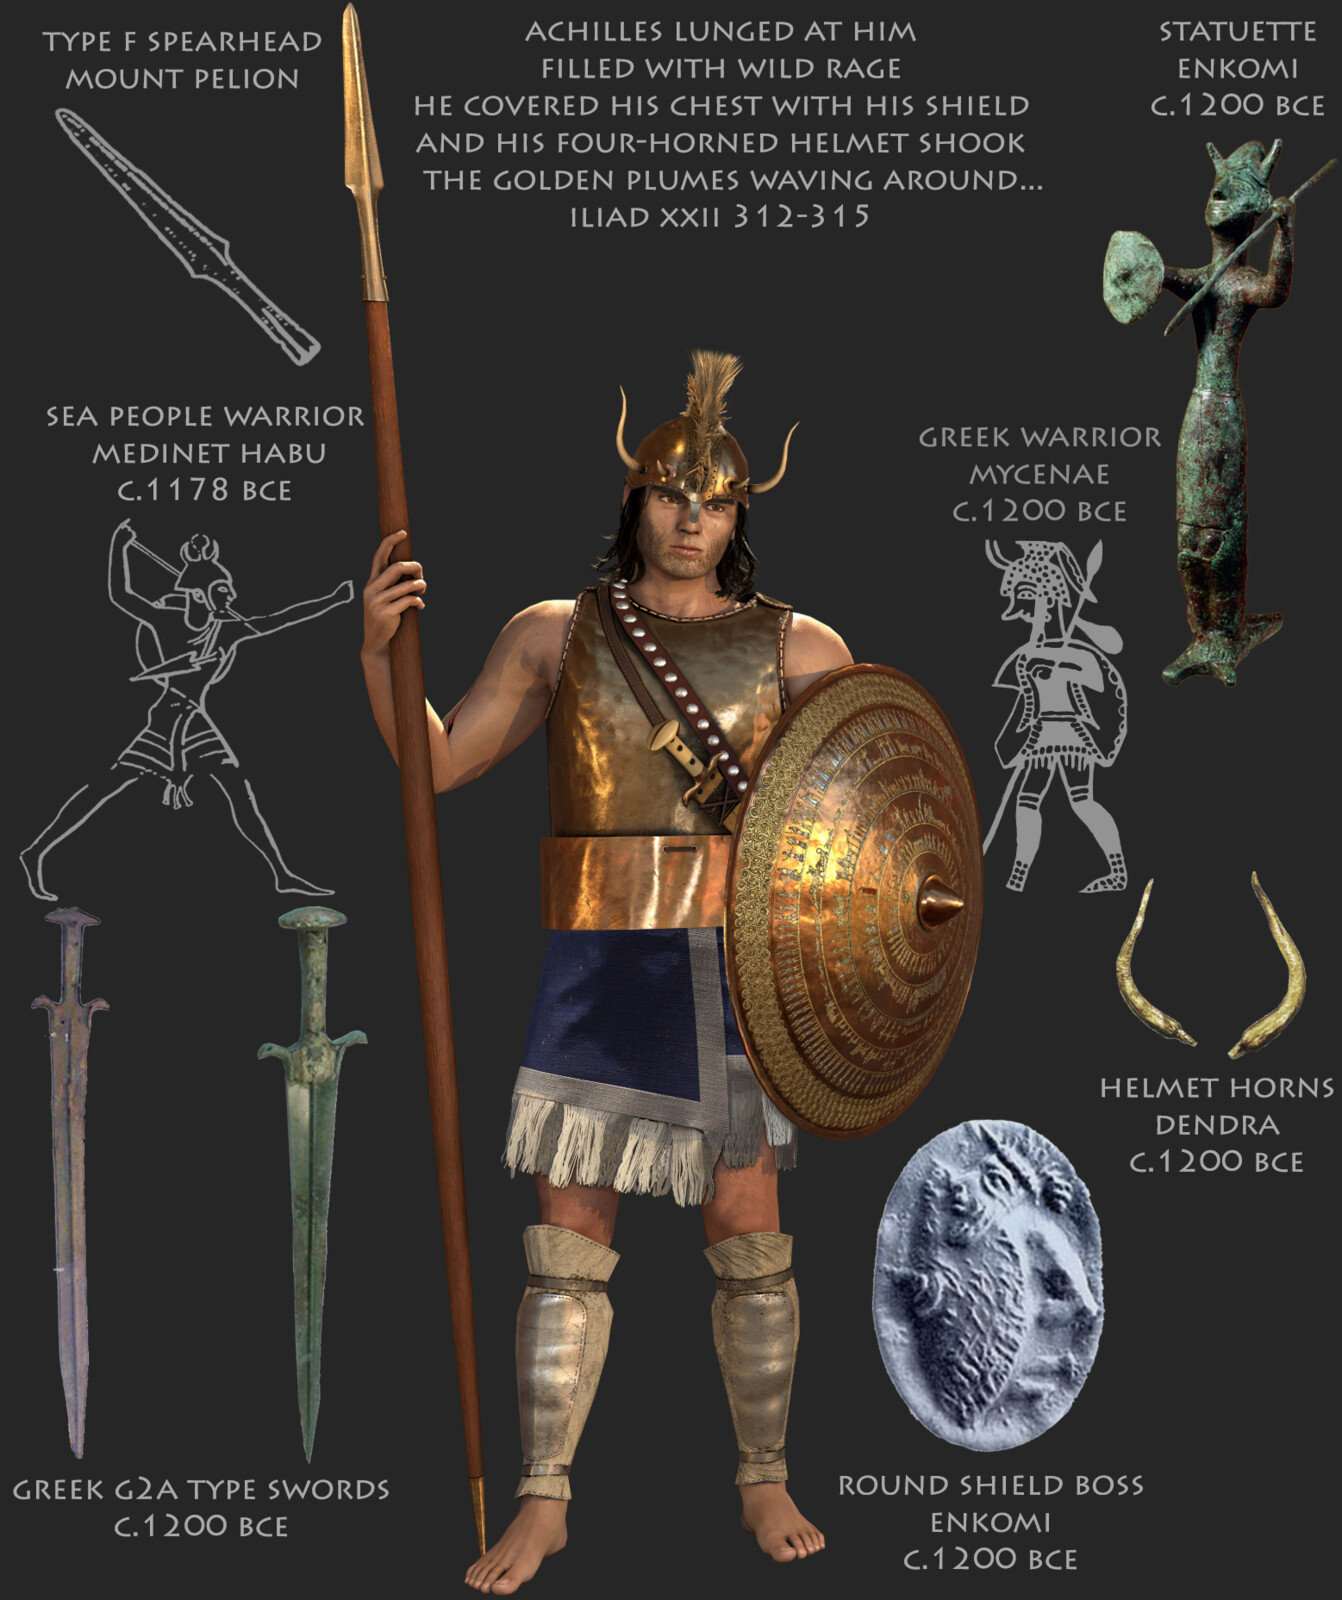 Achilles' spear was from Mount Pelion, so I used a spearhead from there. He wears his sword in a way that was common at the time, attested in Mycenaean pottery as well as the famous Battle of the Delta frieze in Ramesses III's Medinet Habu temple.